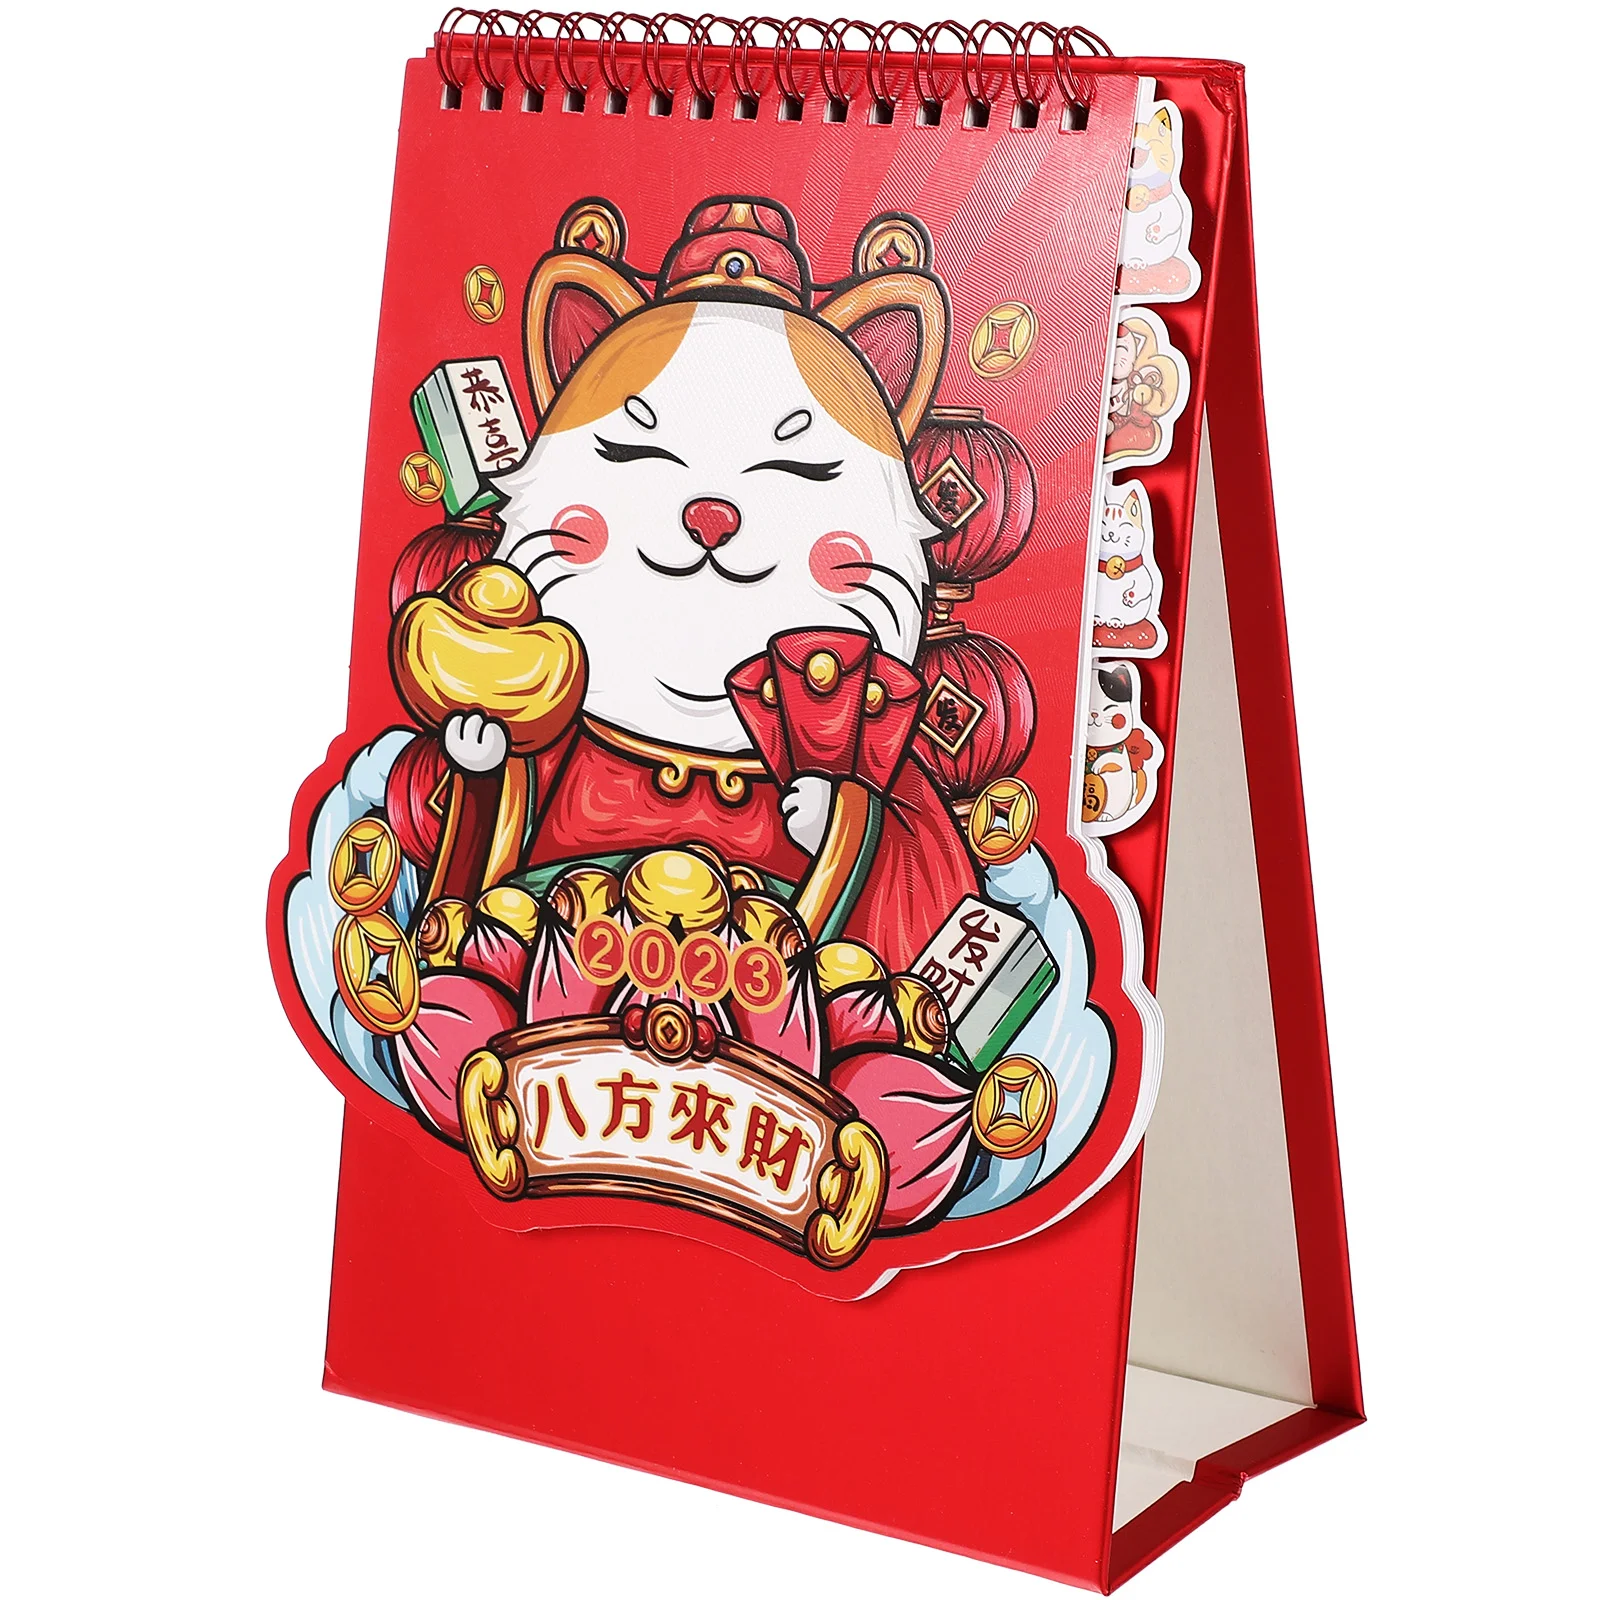 

Calendar Desk Table Office Home Rabbit Year Decorative Standing Cartoon Flipped Design Annual Gift Notes Plan Months Memo Small